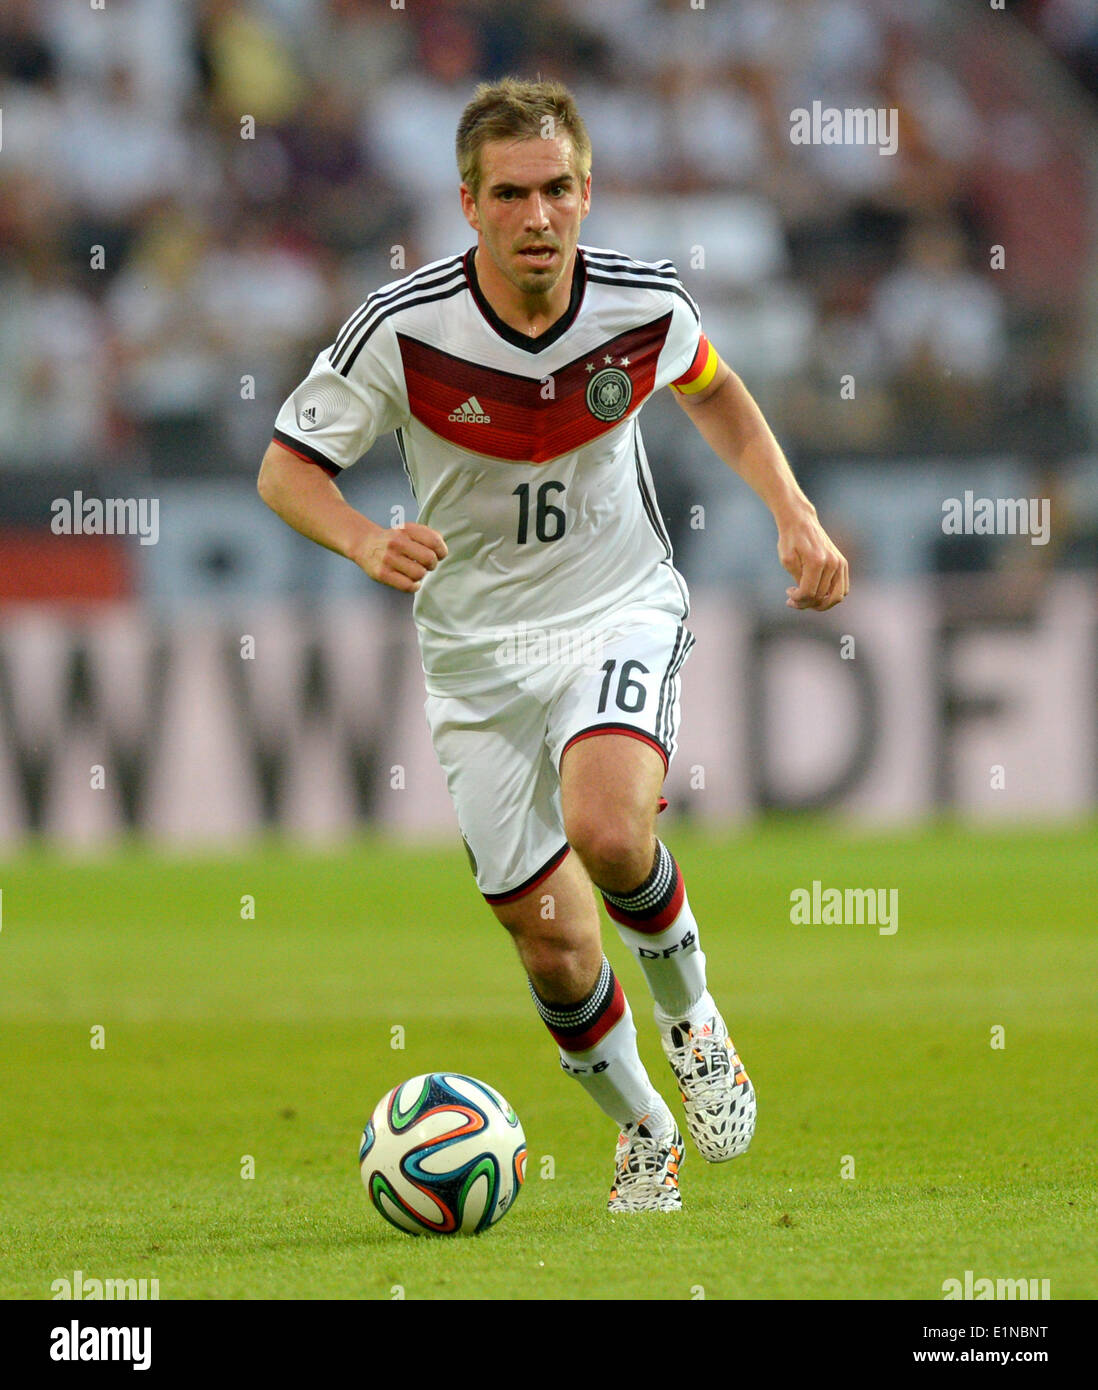 Mainz, Germany. 06th June, 2014. Germany's Philipp Lahm plays the ball during the international friendly match between Germany and Armenia at Coface Arena in Mainz, Germany, 06 June 2014. Germany won 6-1. Photo: Thomas Eisenhuth/dpa/Alamy Live News Stock Photo